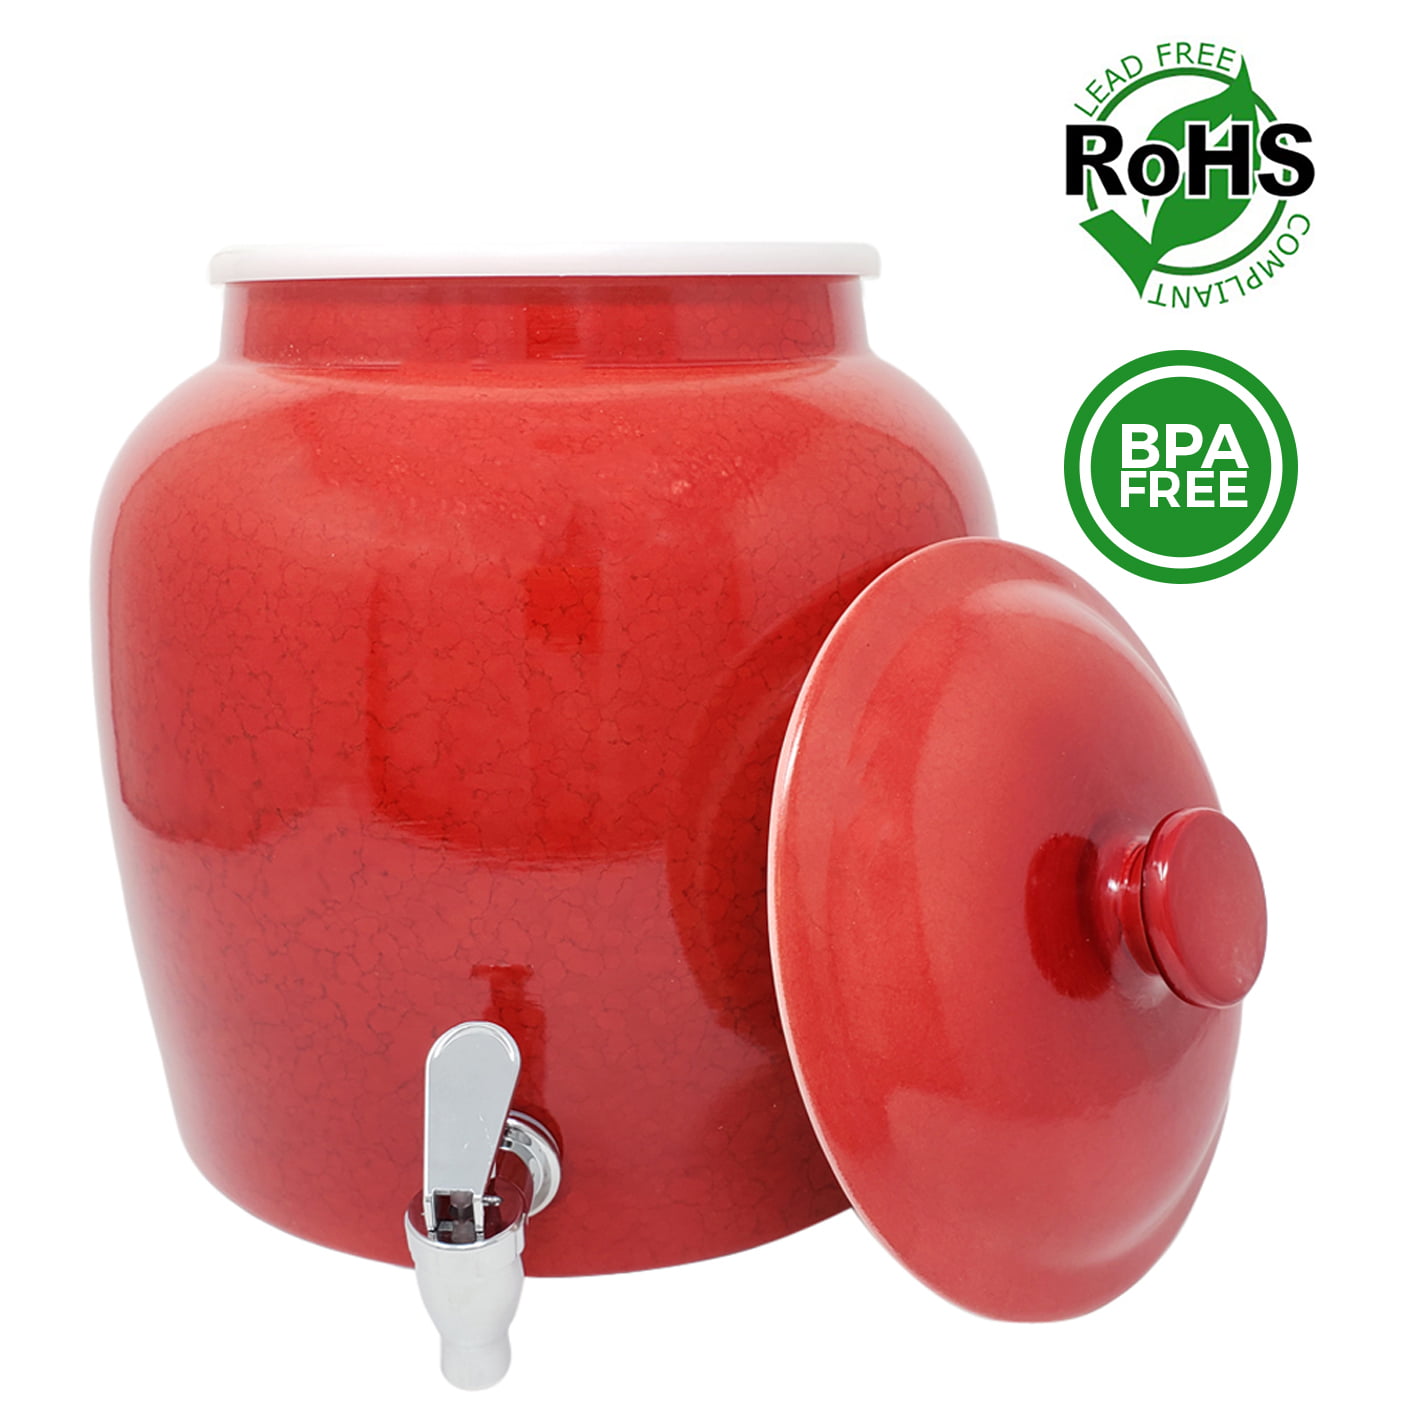 Red Marble Brio Marble Design Porcelain Ceramic Water Dispenser Crock with Faucet LEAD FREE 